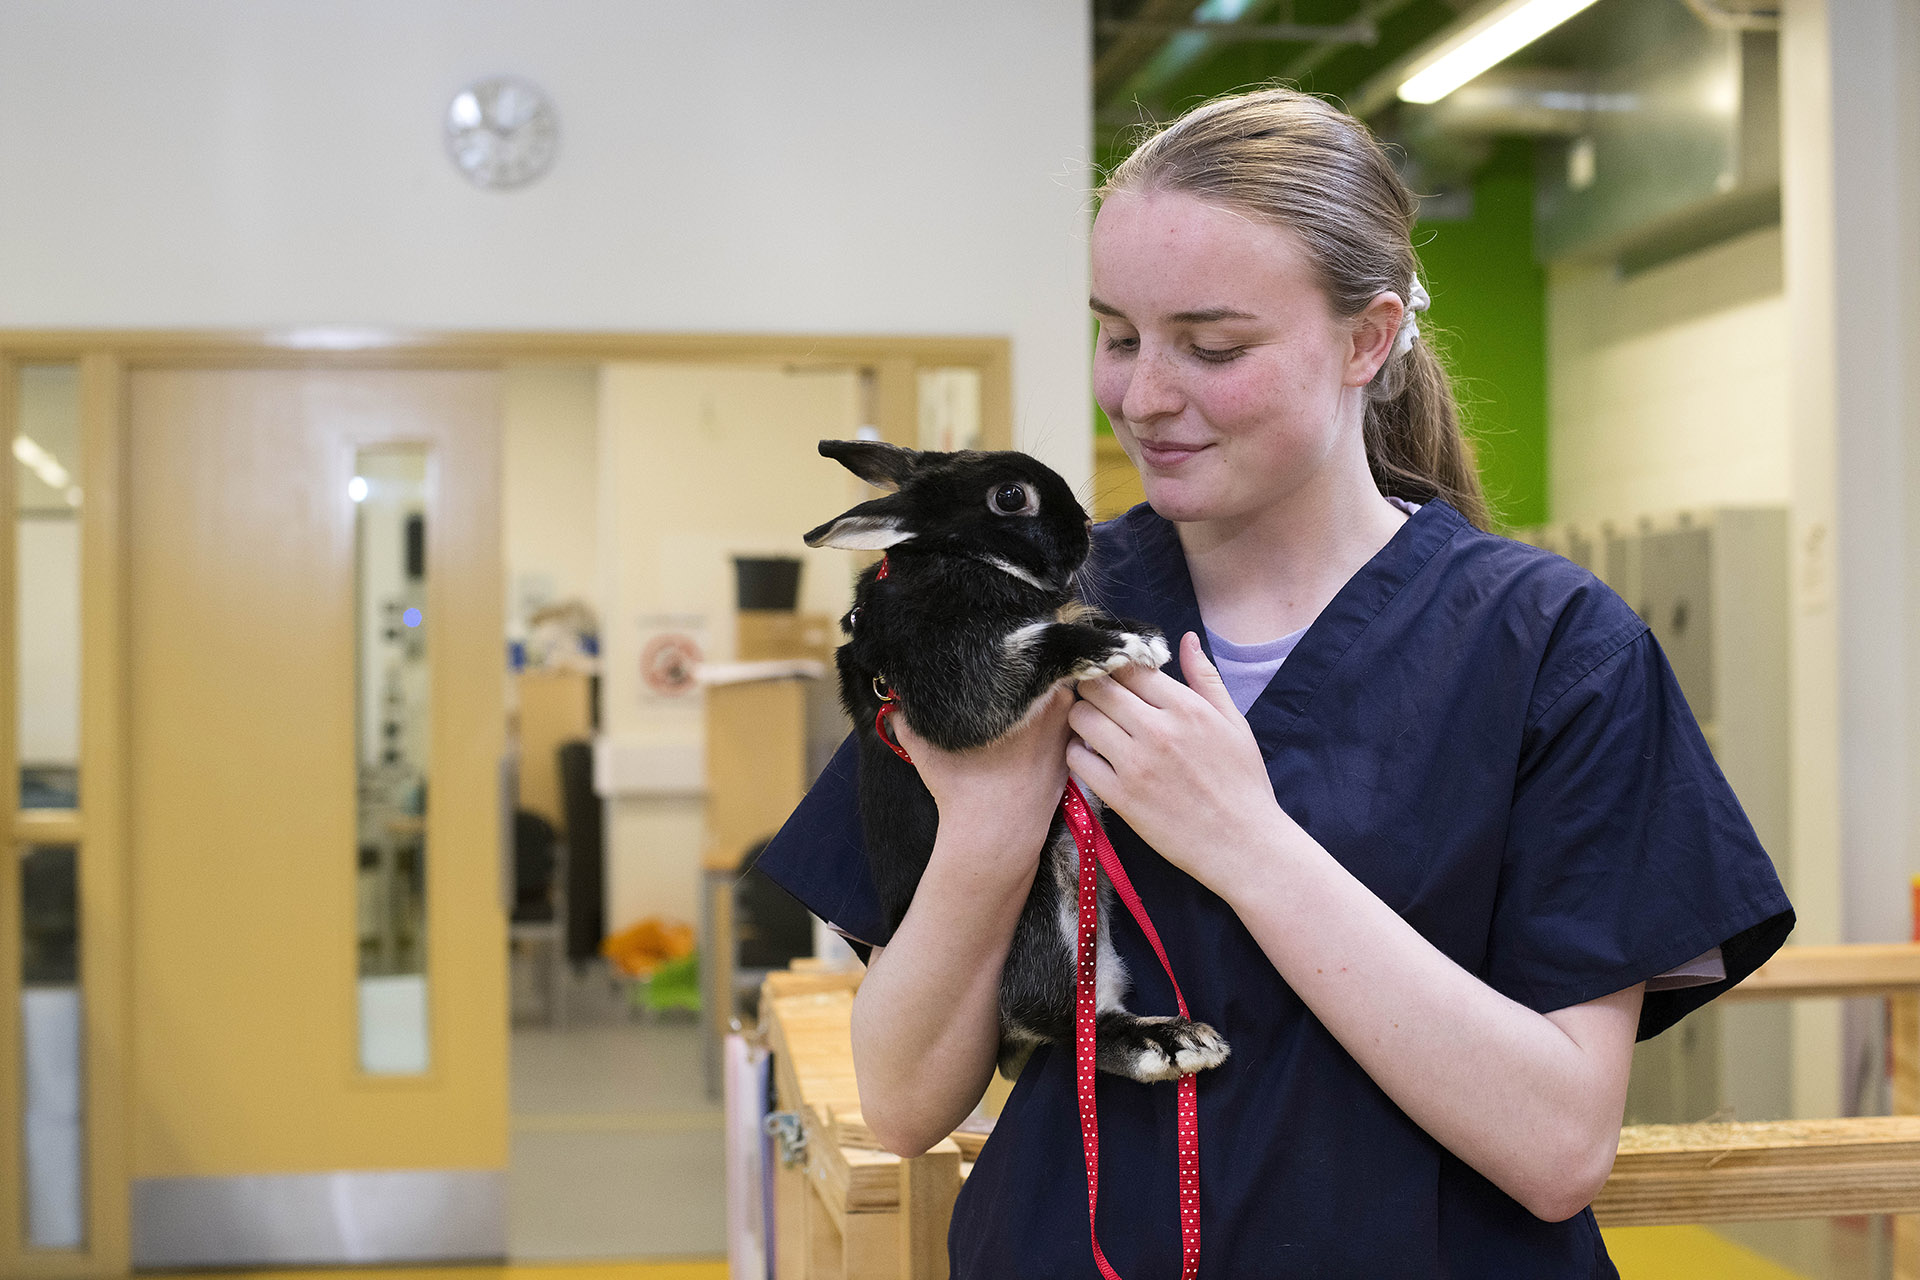 Animal Care Students